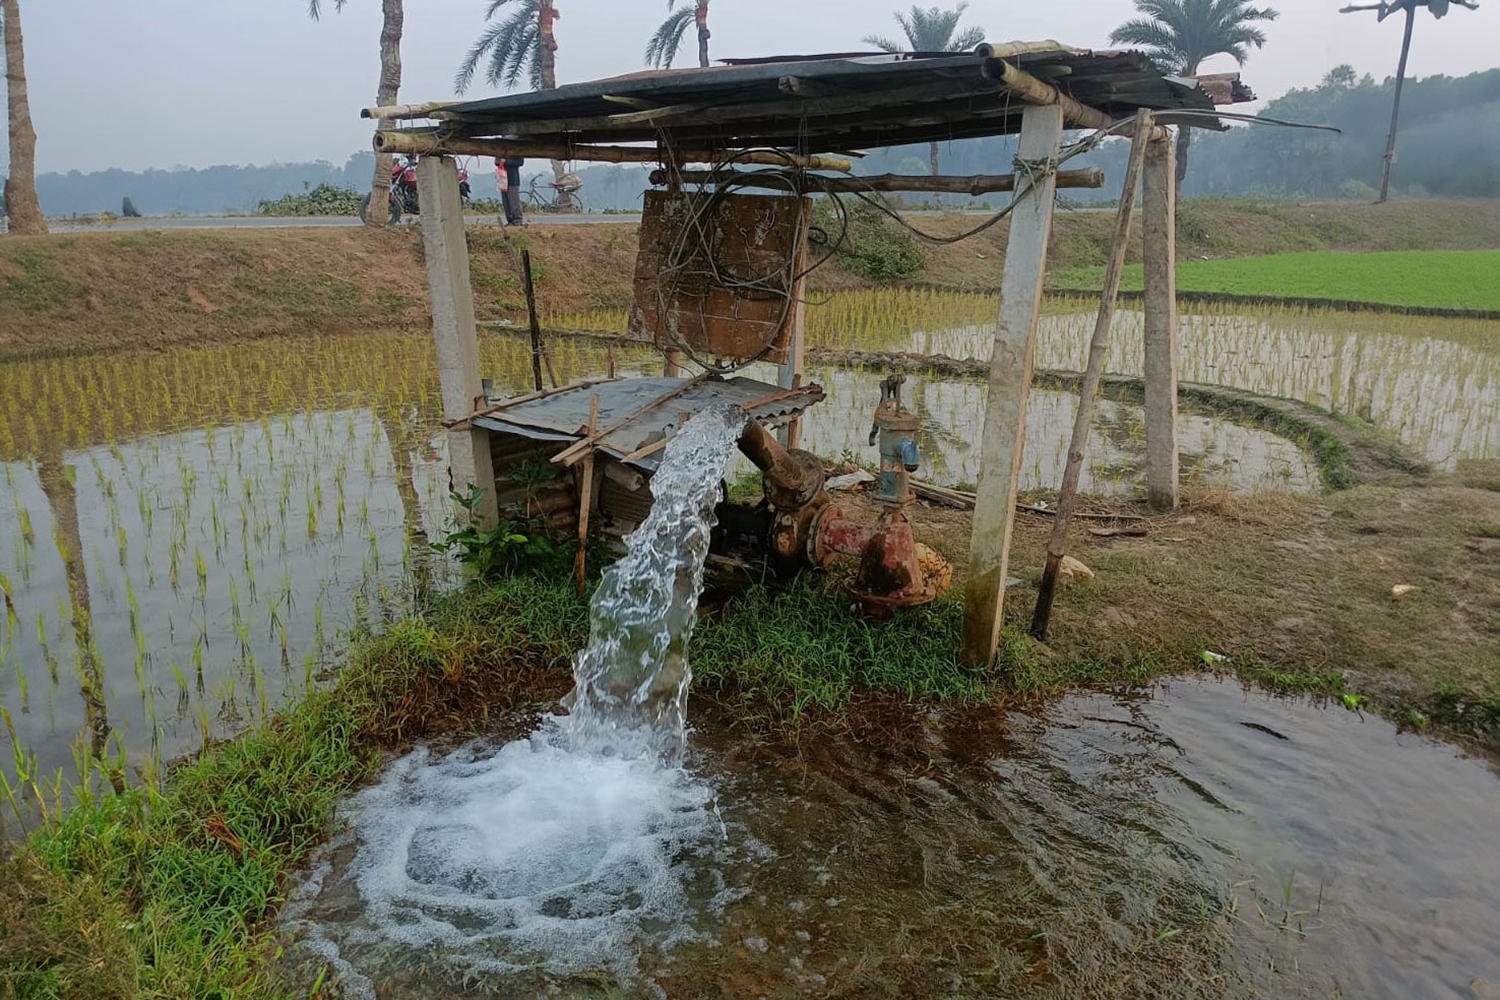 Groundwater-Fed-Irrigation-by-an-Electricity-Operated-Pump.jpg